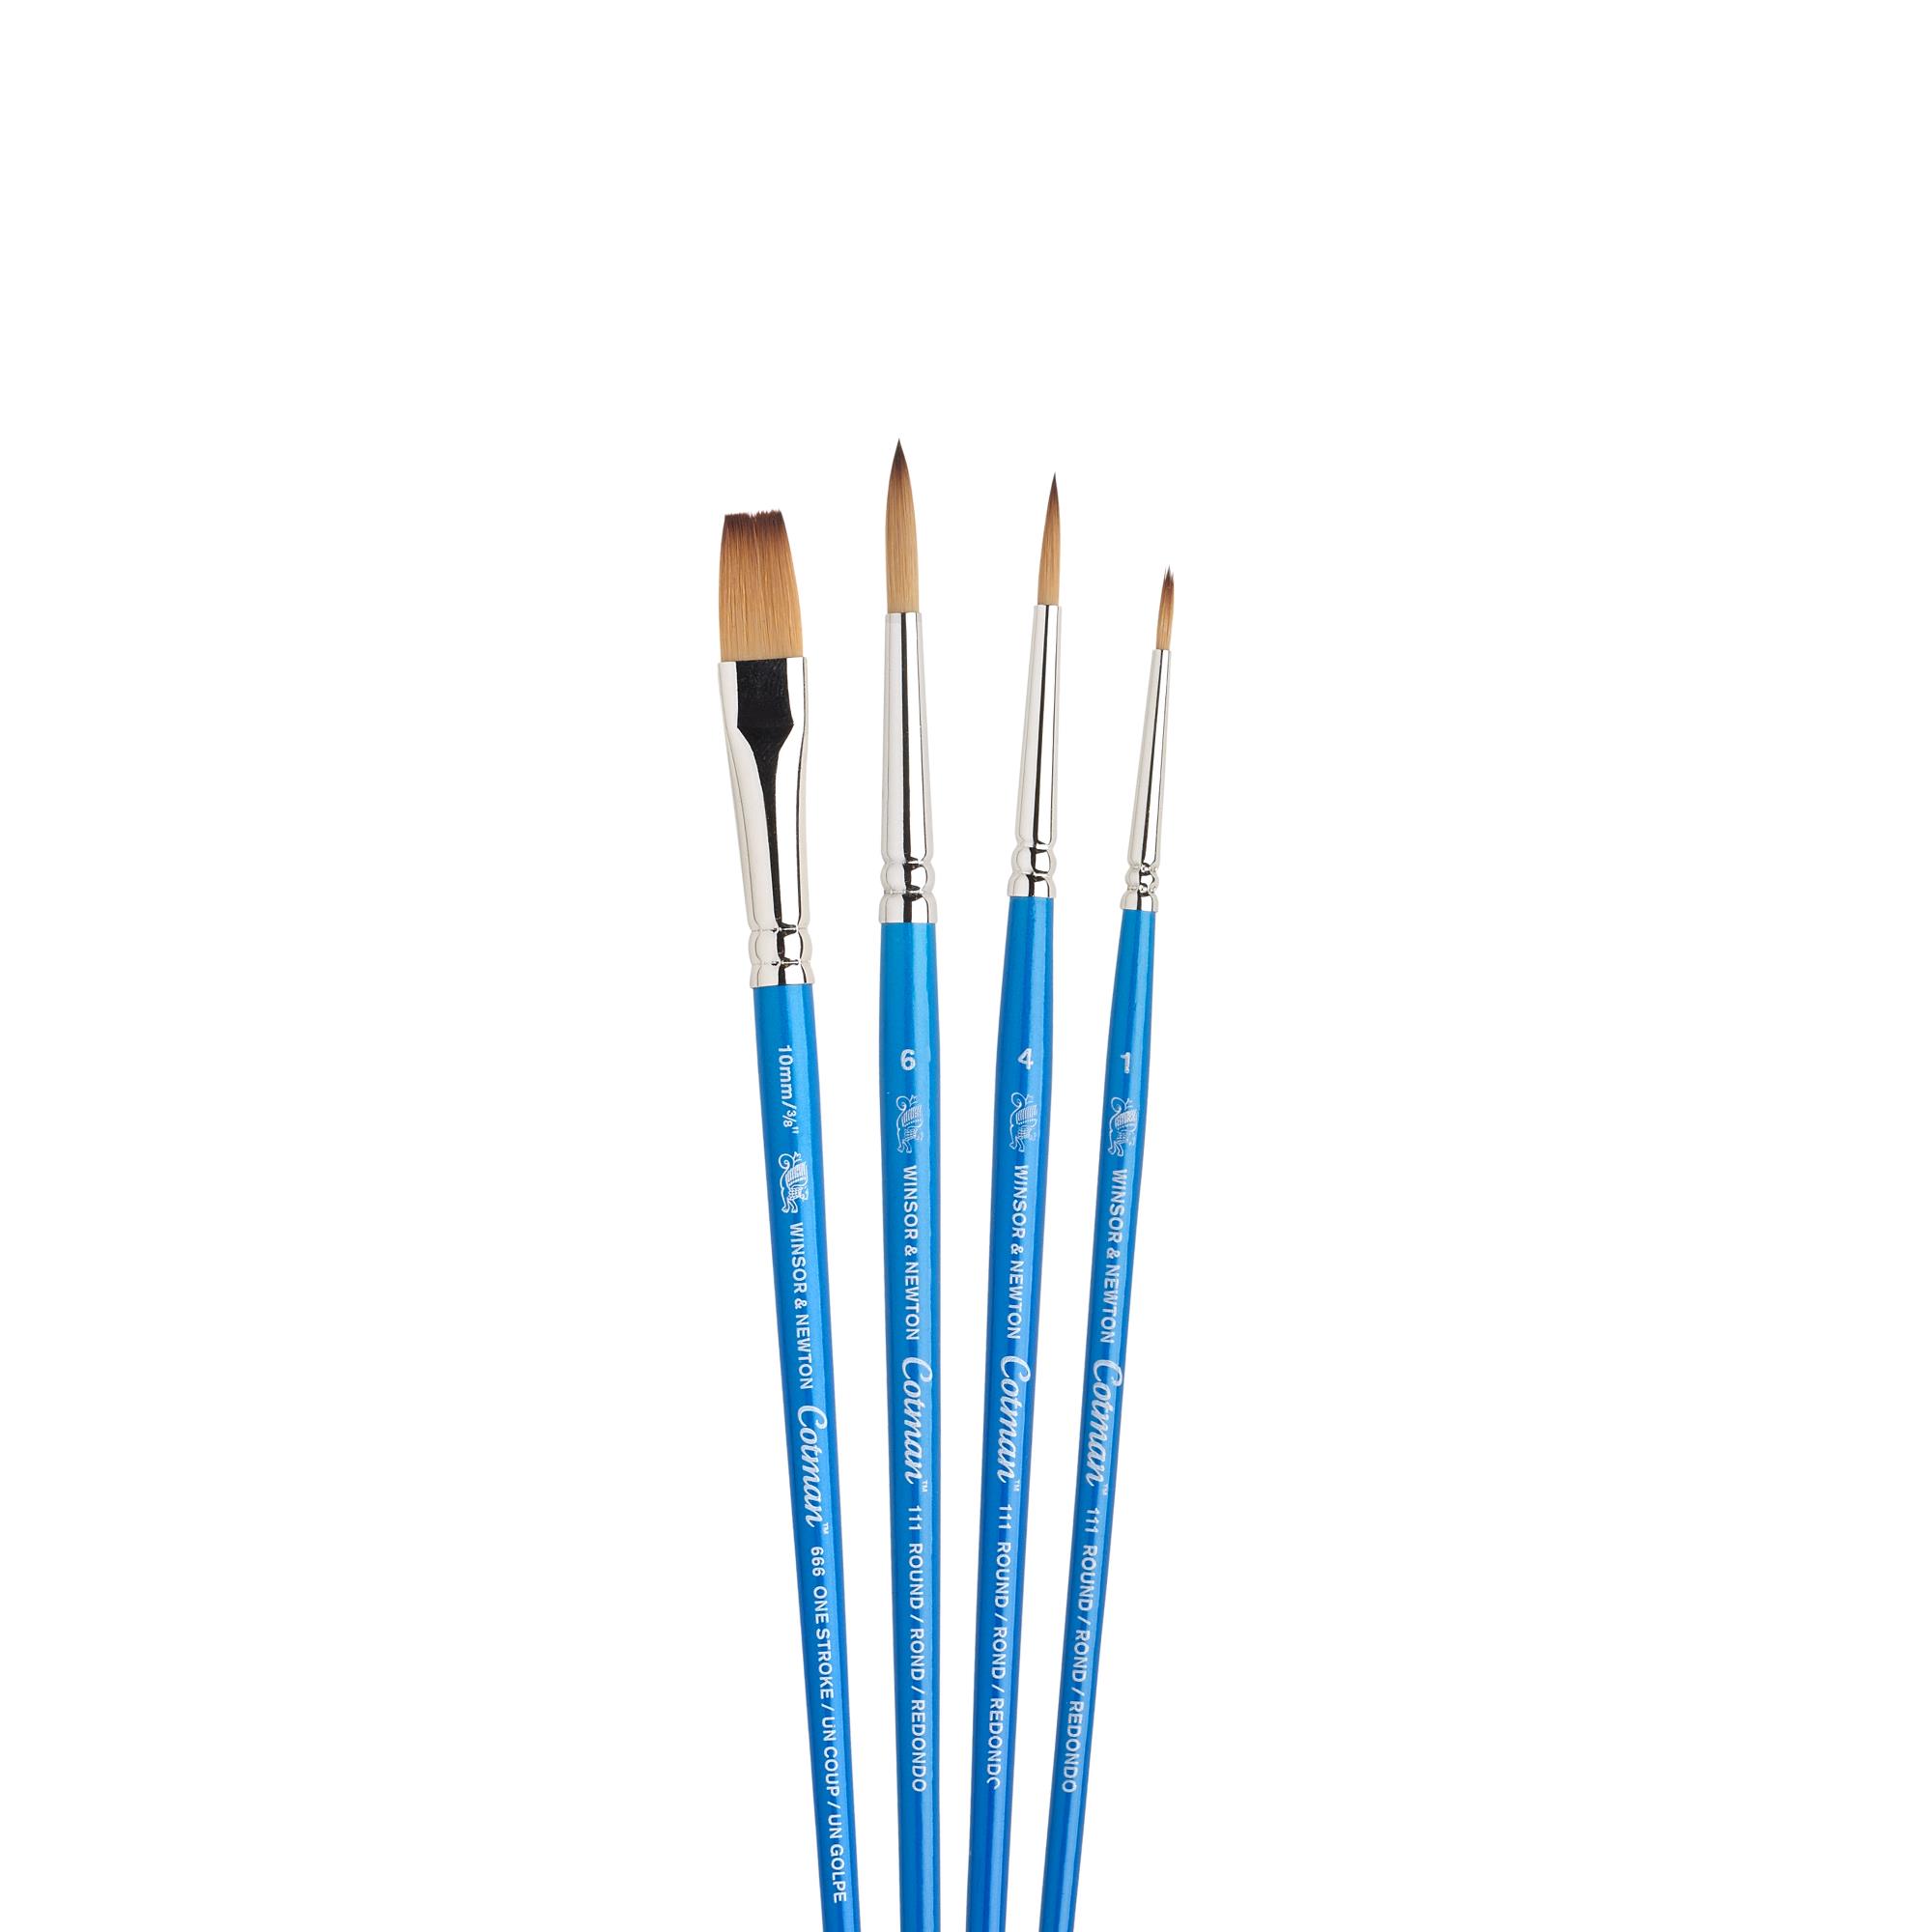 884955033197-W&N COTMAN WATER COLOURS BRUSH SHORT HANDLE 4PK [CLOSE UP] (For Office Print).JPG